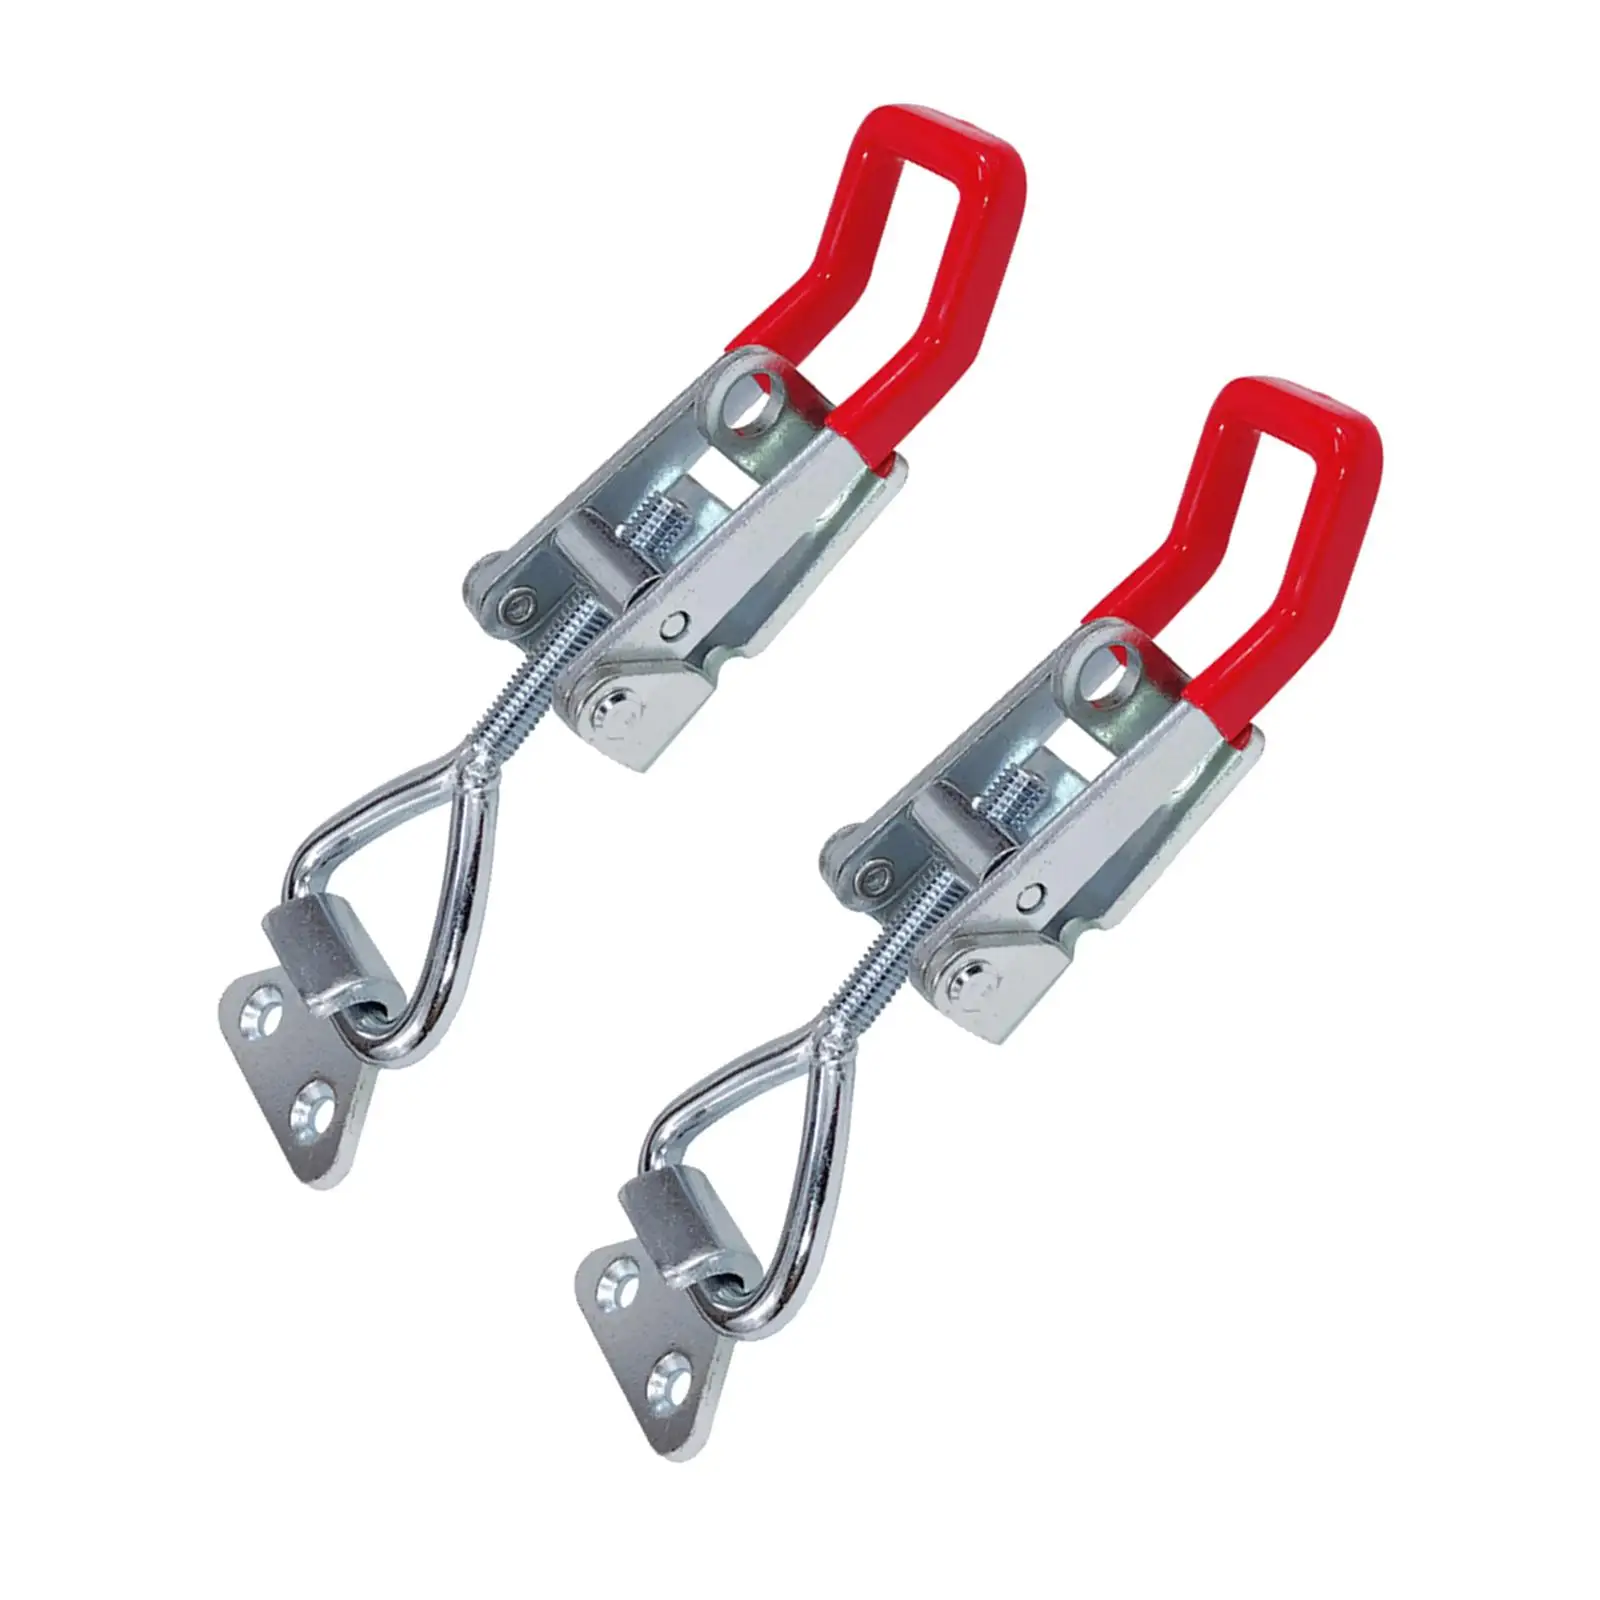 Heavy Duty Toggle Latch Clamp AntiSlip Push Pull Action Hand Tool 600kg Tilt Clamp Latch Type Toggle Clamp for Smoker Lid Jig